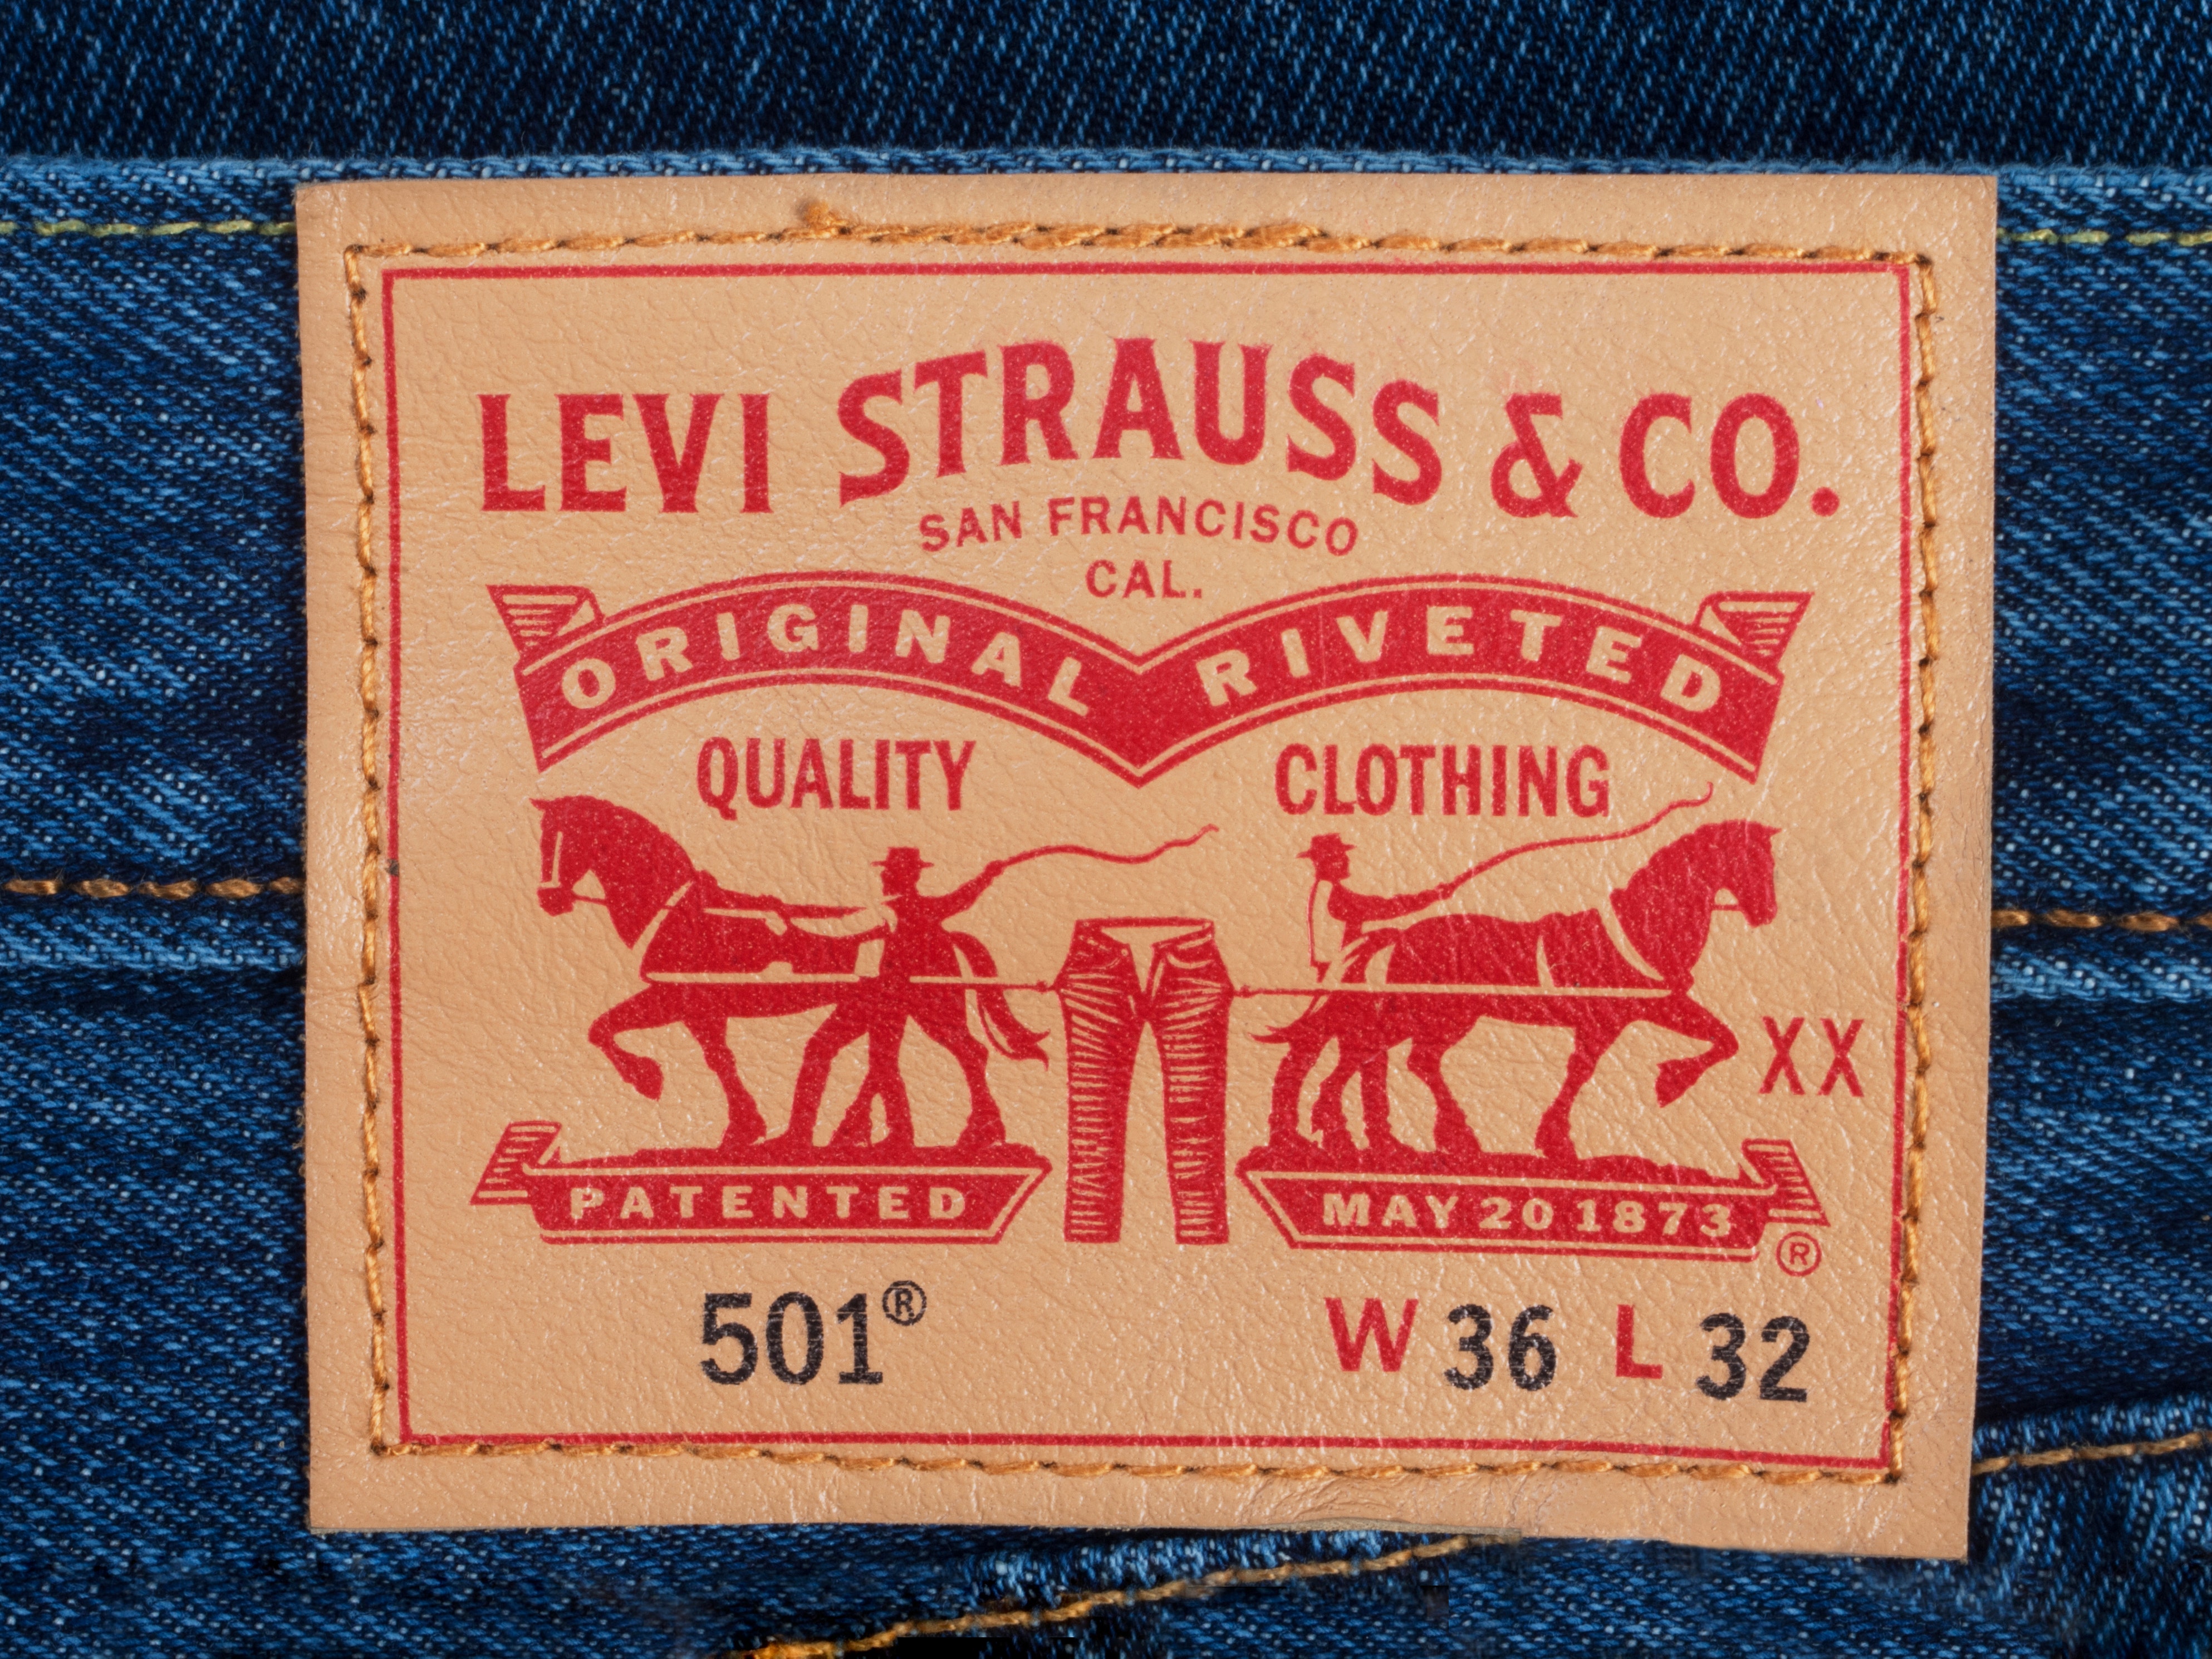 Levi Strauss Stock: A Great Buy While The Market Isn't Looking (NYSE:LEVI)  | Seeking Alpha